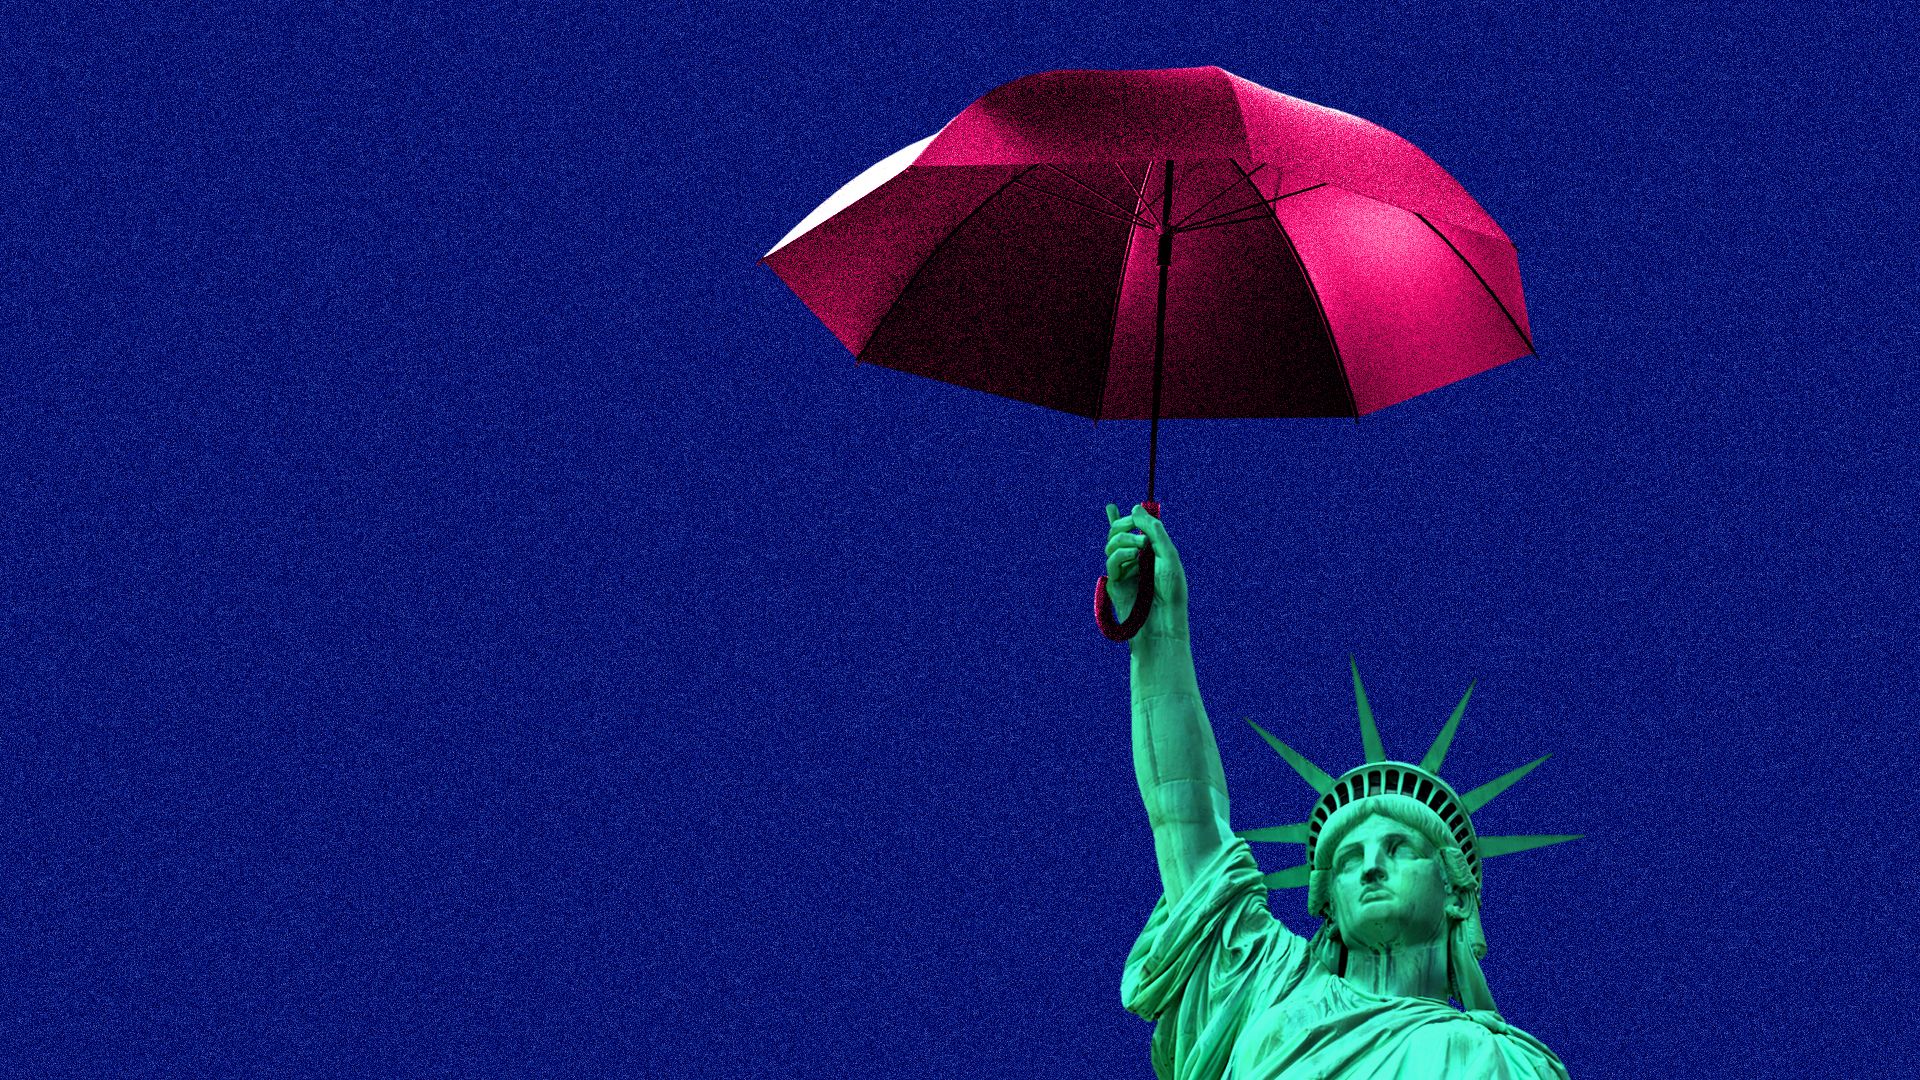 Illustration of the Statue of Liberty holding up a red umbrella against a blue background